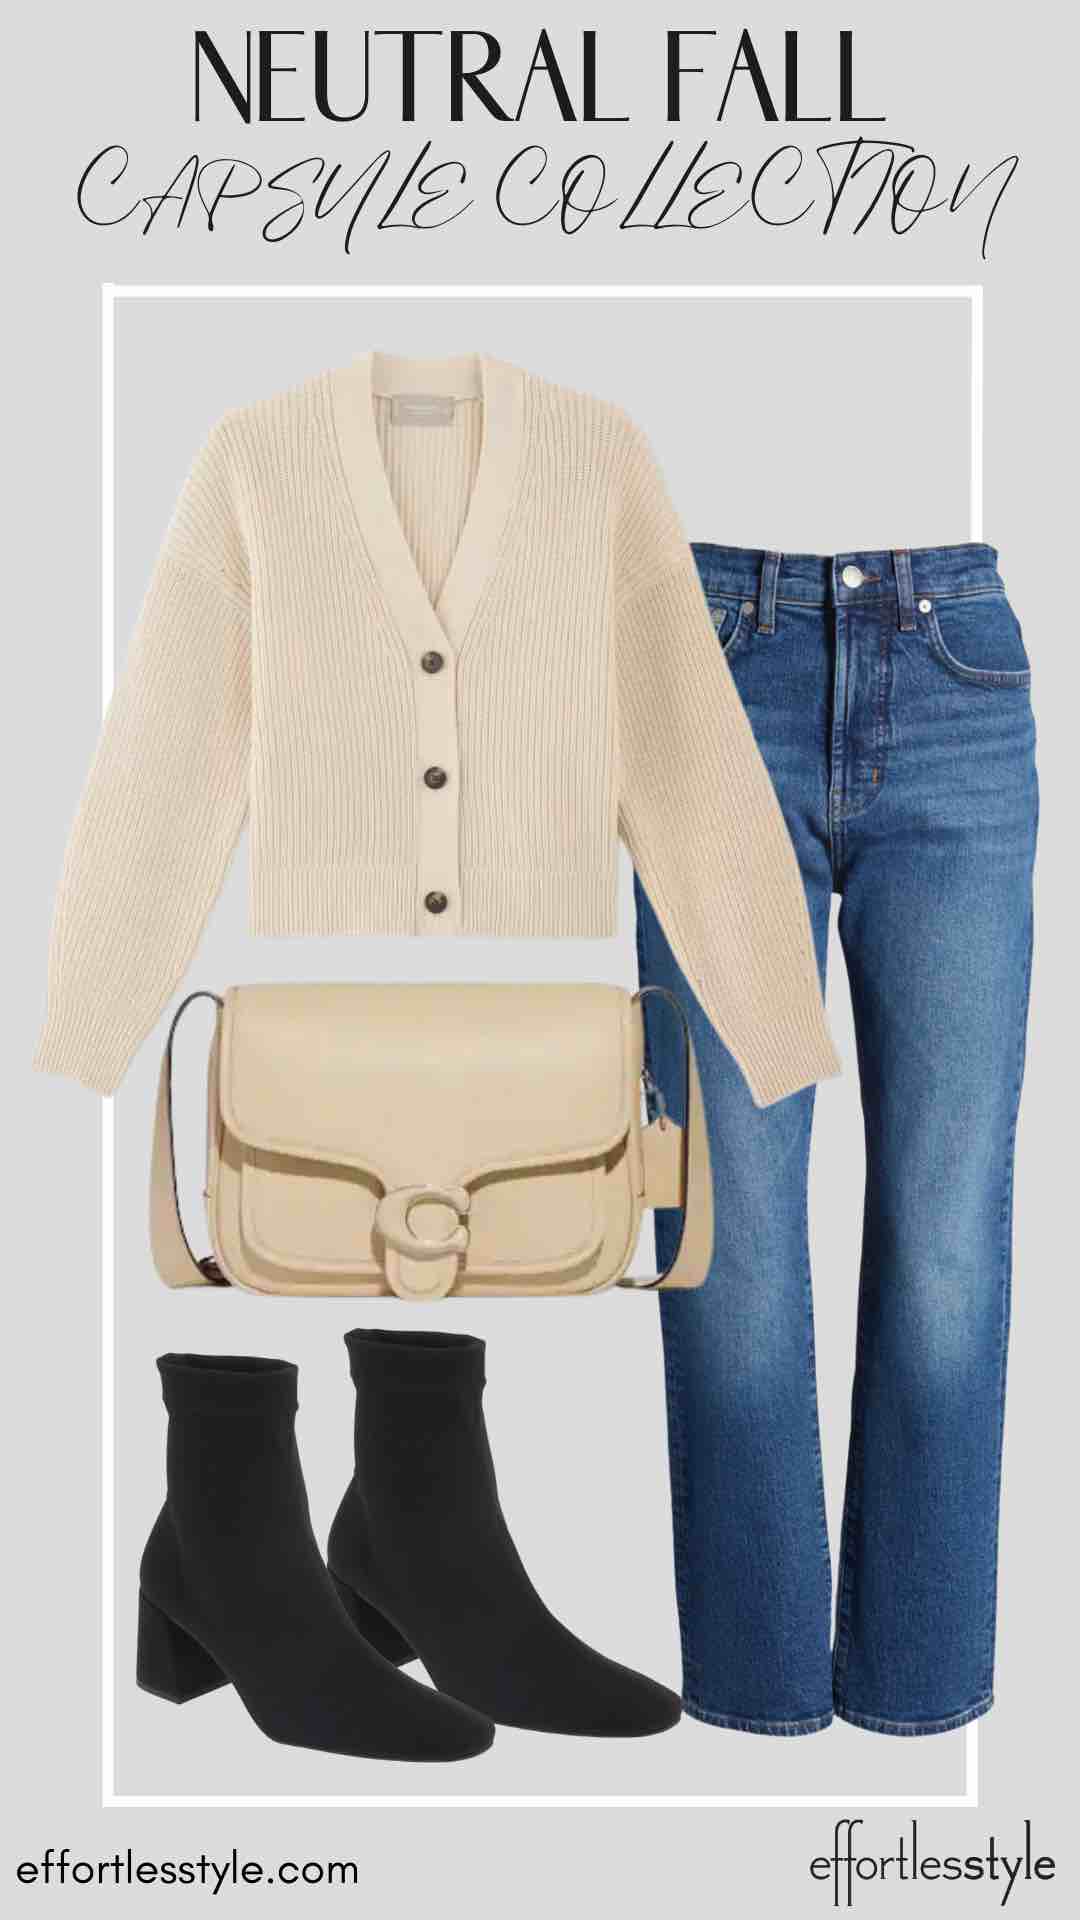 How To Wear Our Neutral Fall Capsule Wardrobe - Part 2 Cardigan & Dark Wash Jeans how to style sock booties how to wear sock booties with straight leg jeans how to mix beige and black accessories travel day style inspiration for fall how to wear a cardigan with jeans how to wear a cardigan with booties